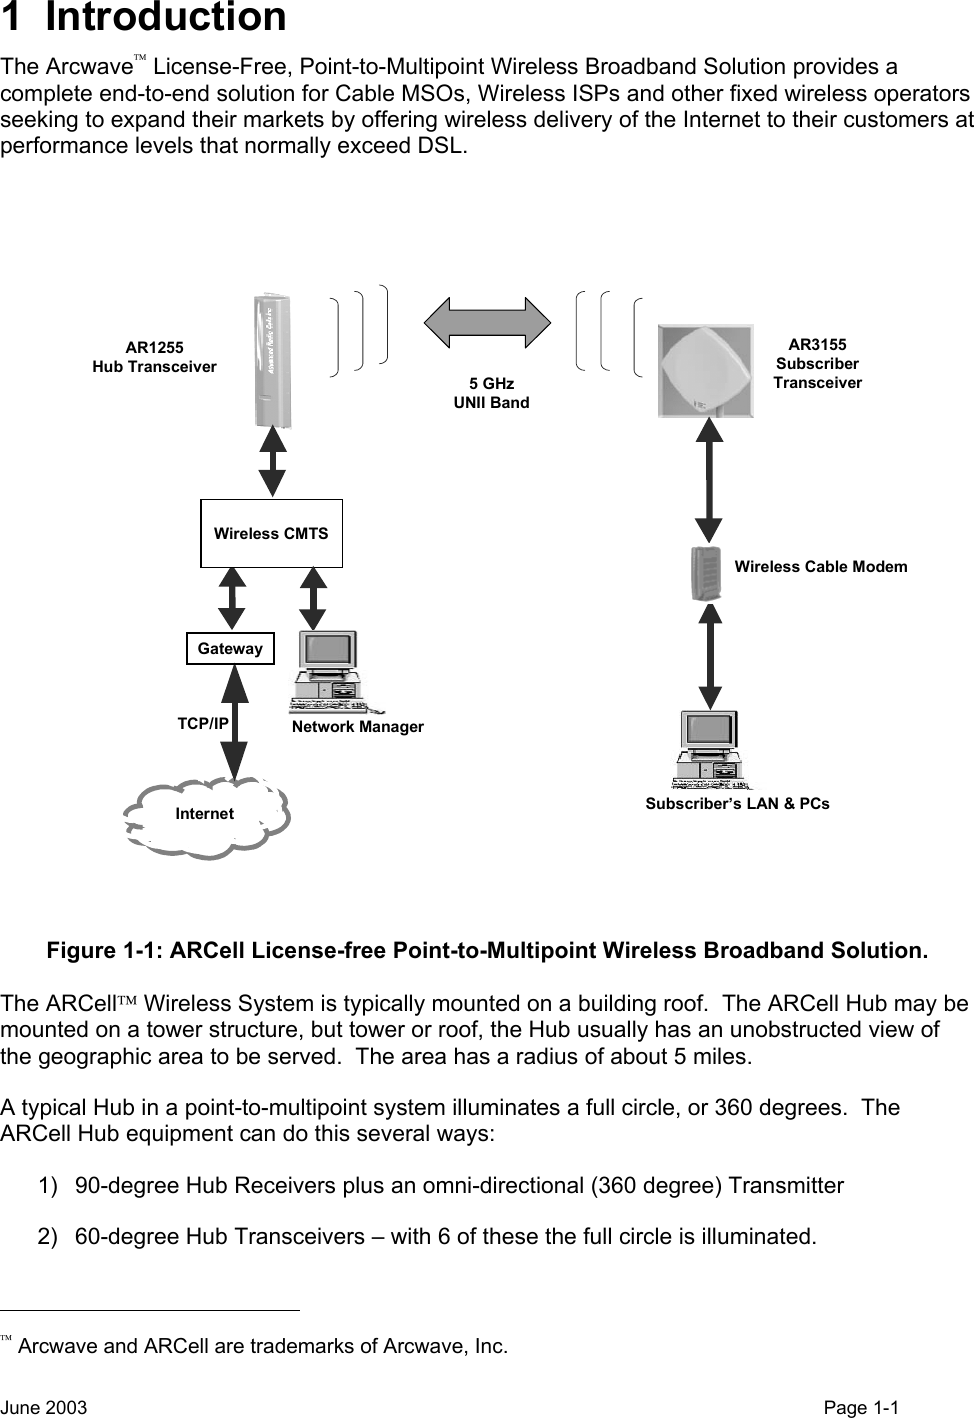  1 Introduction The Arcwave License-Free, Point-to-Multipoint Wireless Broadband Solution provides a complete end-to-end solution for Cable MSOs, Wireless ISPs and other fixed wireless operators seeking to expand their markets by offering wireless delivery of the Internet to their customers at performance levels that normally exceed DSL.  TCP/IPCableModemAR3155SubscriberTransceiverInternetWireless Cable ModemWireless CMTSAR1255Hub Transceiver5 GHzUNII BandNetwork ManagerGatewaySubscriber’s LAN &amp; PCs Figure 1-1: ARCell License-free Point-to-Multipoint Wireless Broadband Solution. The ARCell Wireless System is typically mounted on a building roof.  The ARCell Hub may be mounted on a tower structure, but tower or roof, the Hub usually has an unobstructed view of the geographic area to be served.  The area has a radius of about 5 miles. A typical Hub in a point-to-multipoint system illuminates a full circle, or 360 degrees.  The ARCell Hub equipment can do this several ways: 1)  90-degree Hub Receivers plus an omni-directional (360 degree) Transmitter 2)  60-degree Hub Transceivers – with 6 of these the full circle is illuminated. June 2003    Page 1-1                                                    Arcwave and ARCell are trademarks of Arcwave, Inc. 